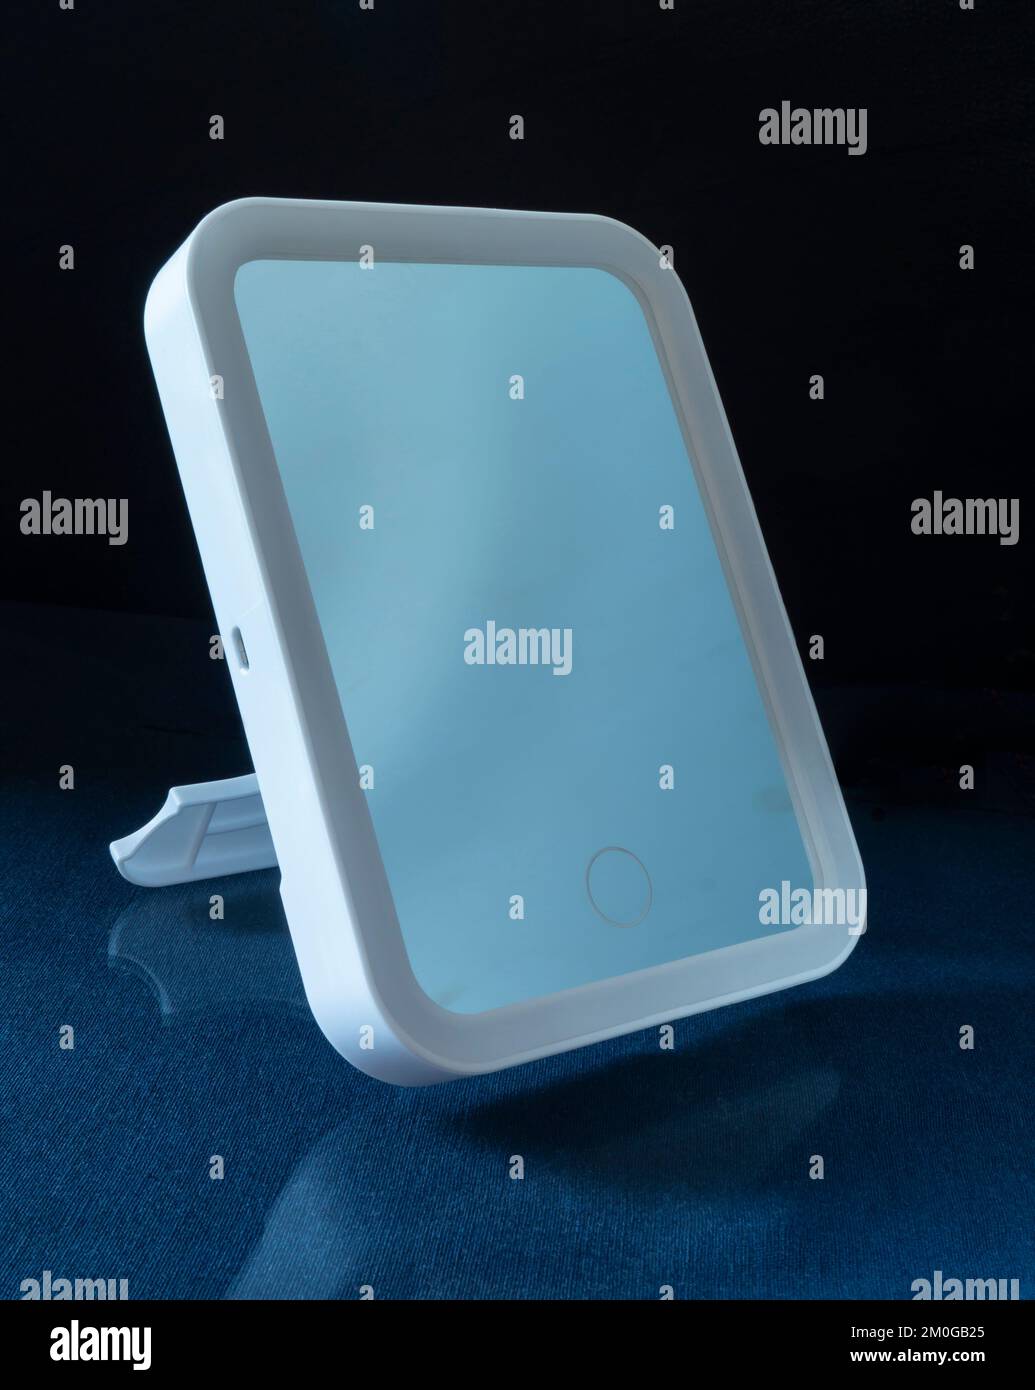 The mirror is illuminated along the contour. Household items on a black background Stock Photo